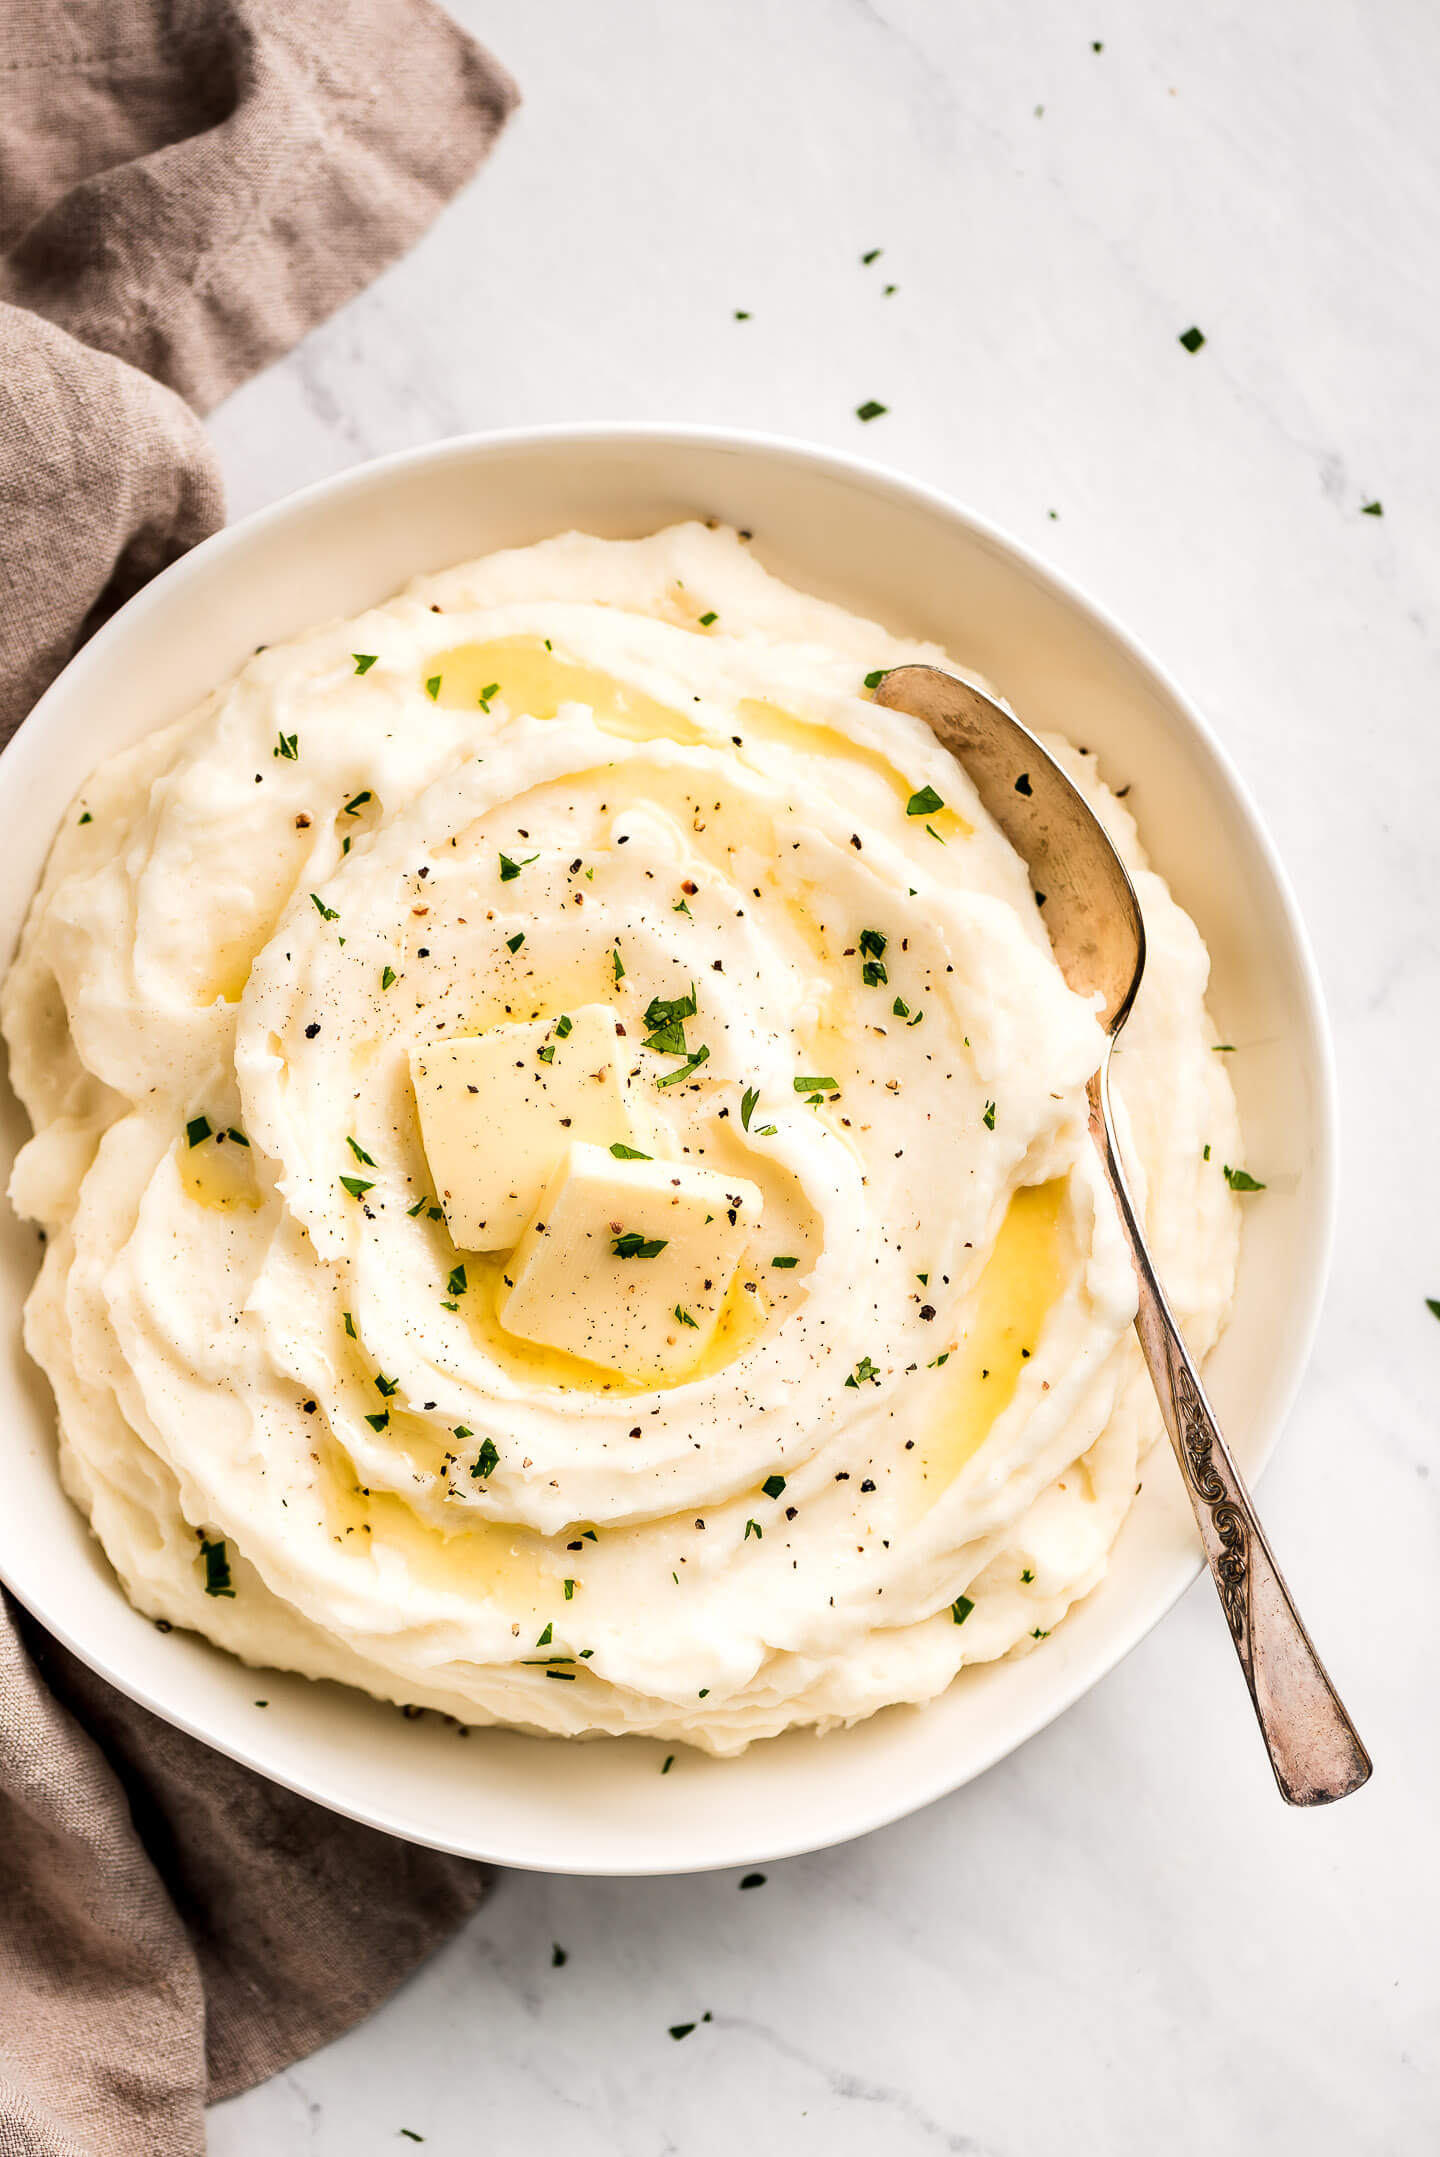 The best Mashed Potatoes garnished with pats of butter, pepper, and parsley in a large white serving bowl.